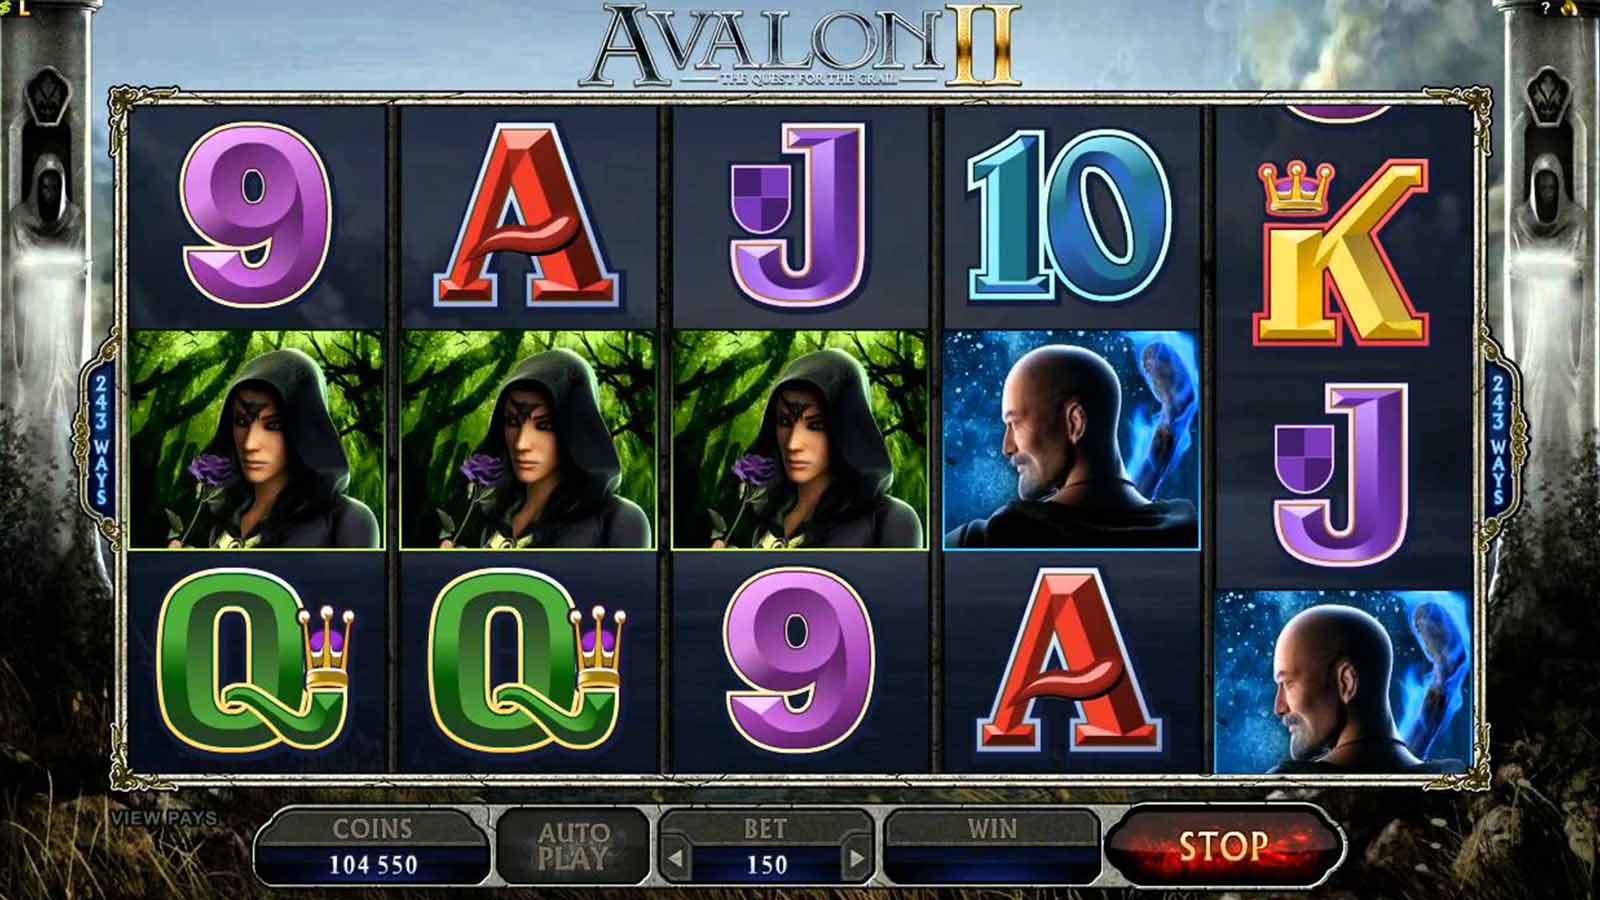 6.Avalon-II-The-Quest-for-the-Grail